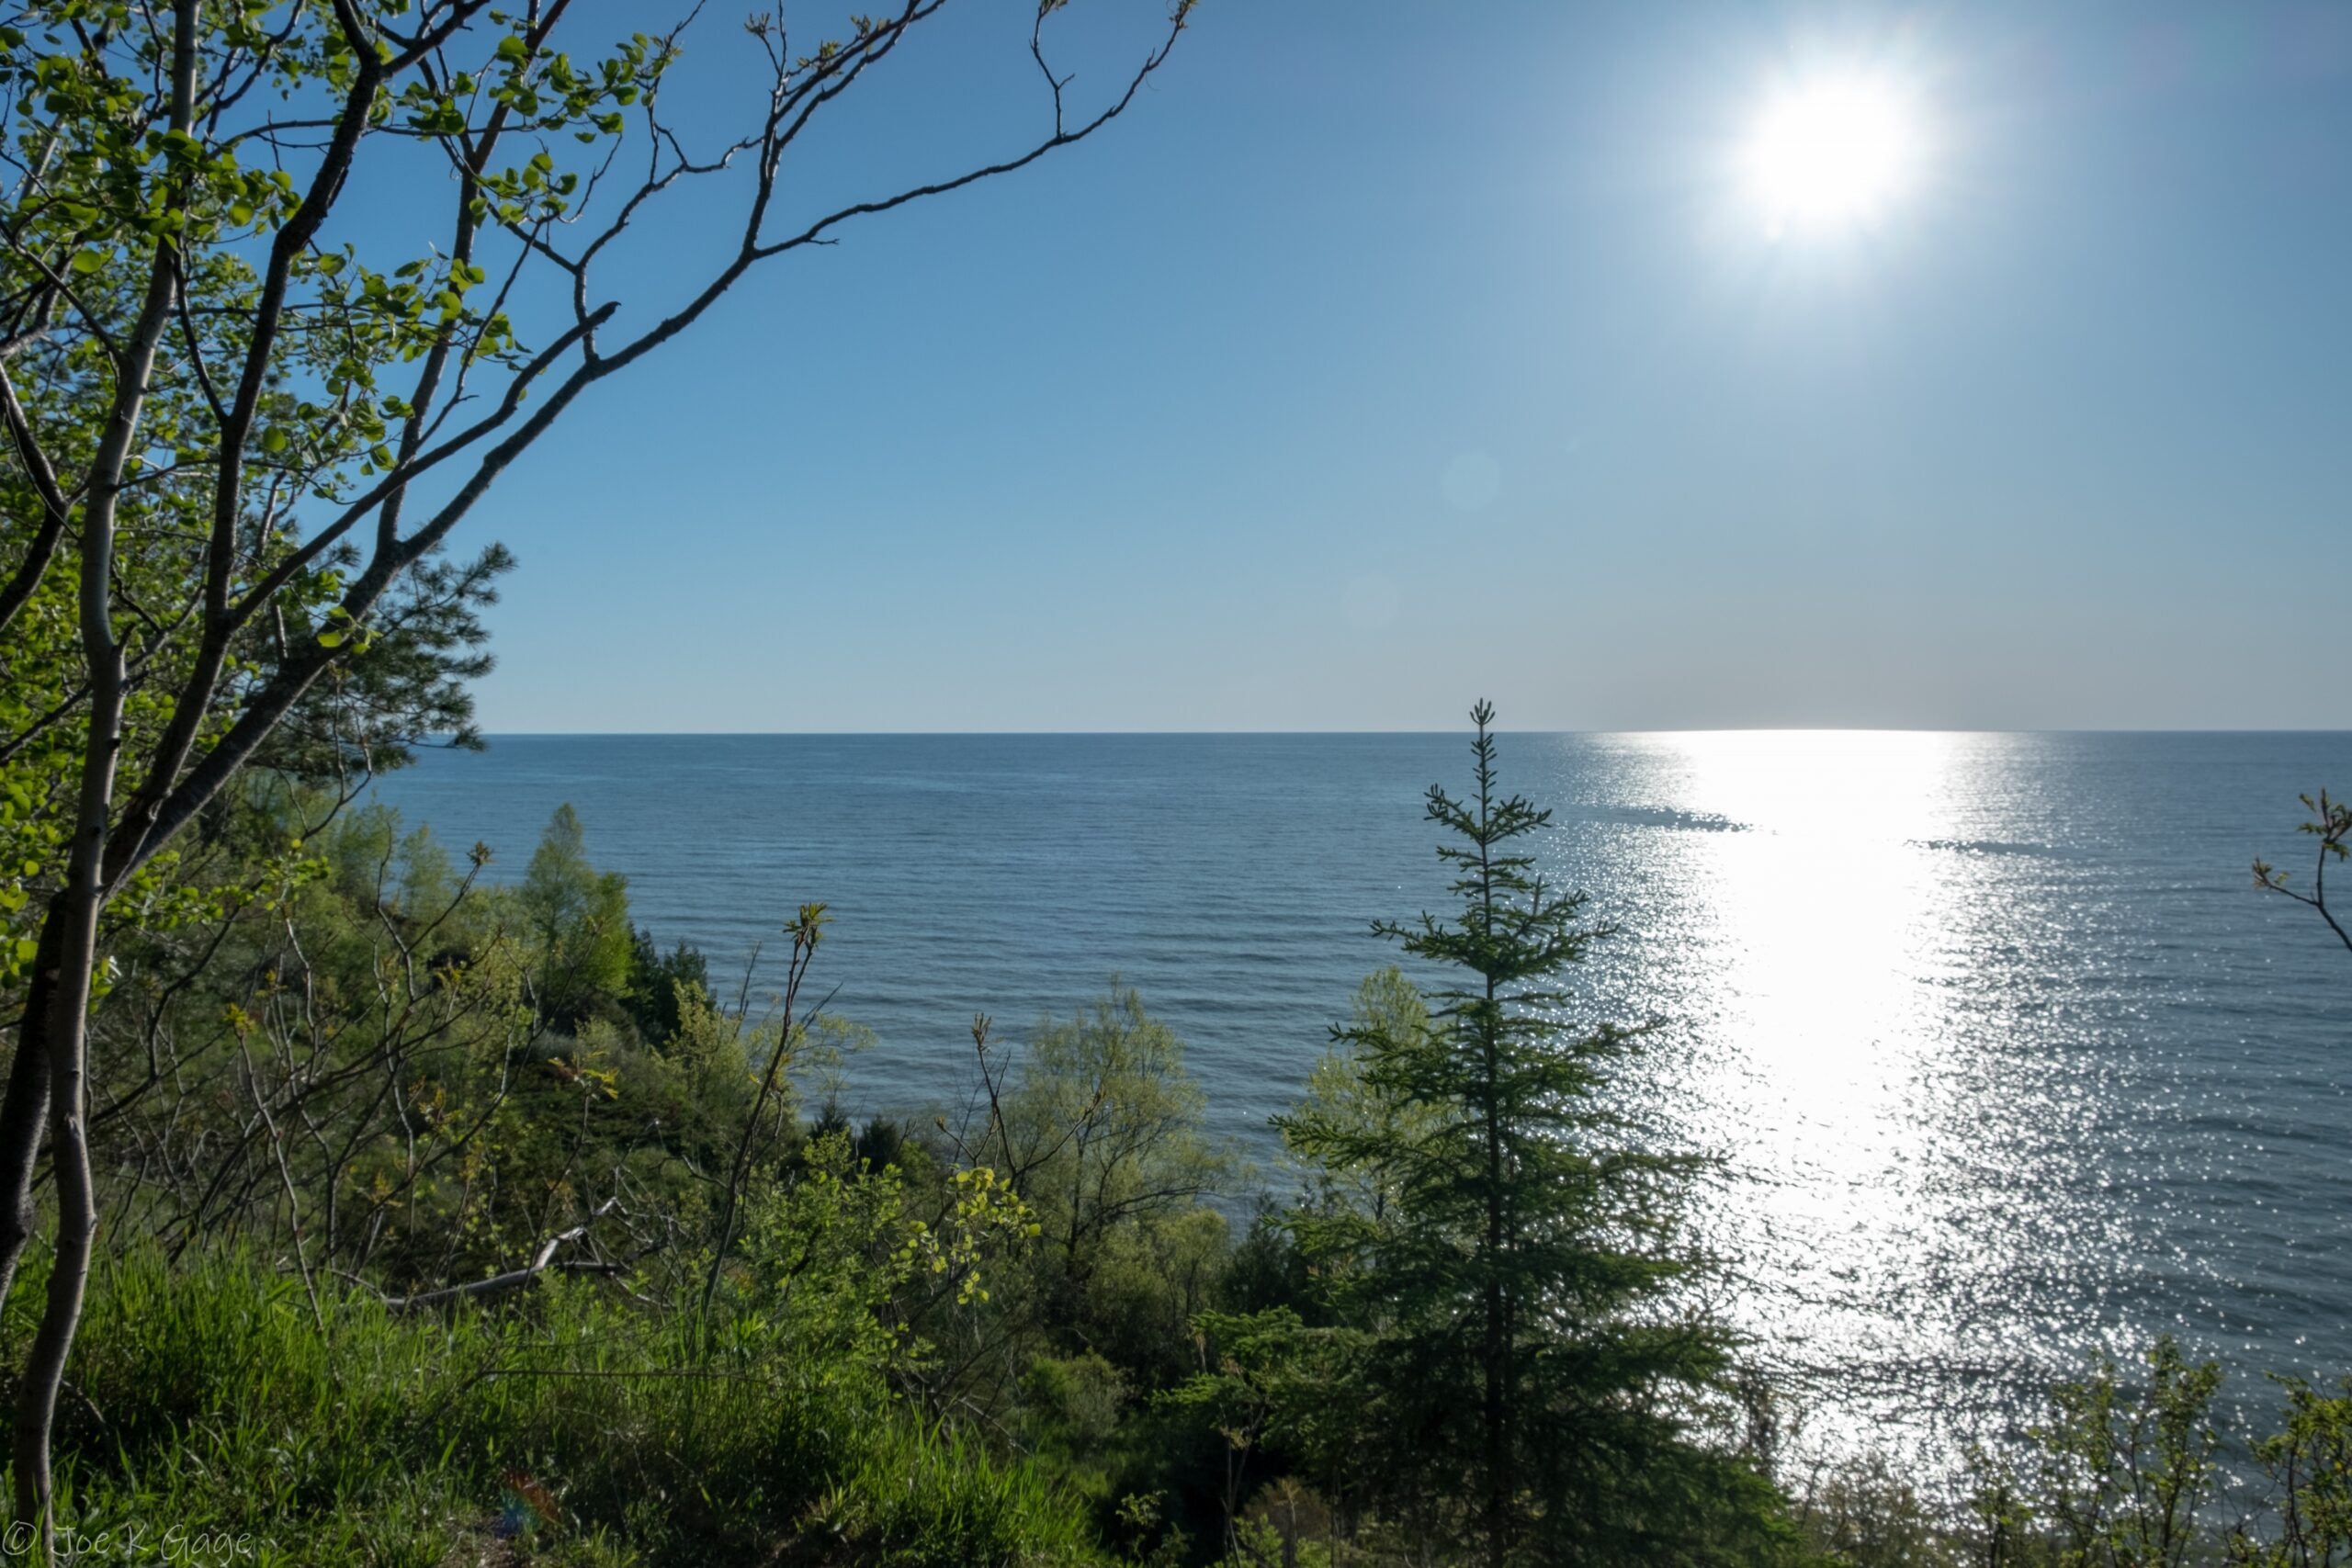 A view of Lake Michigan from Lion's Den Gorge Nature Preserve